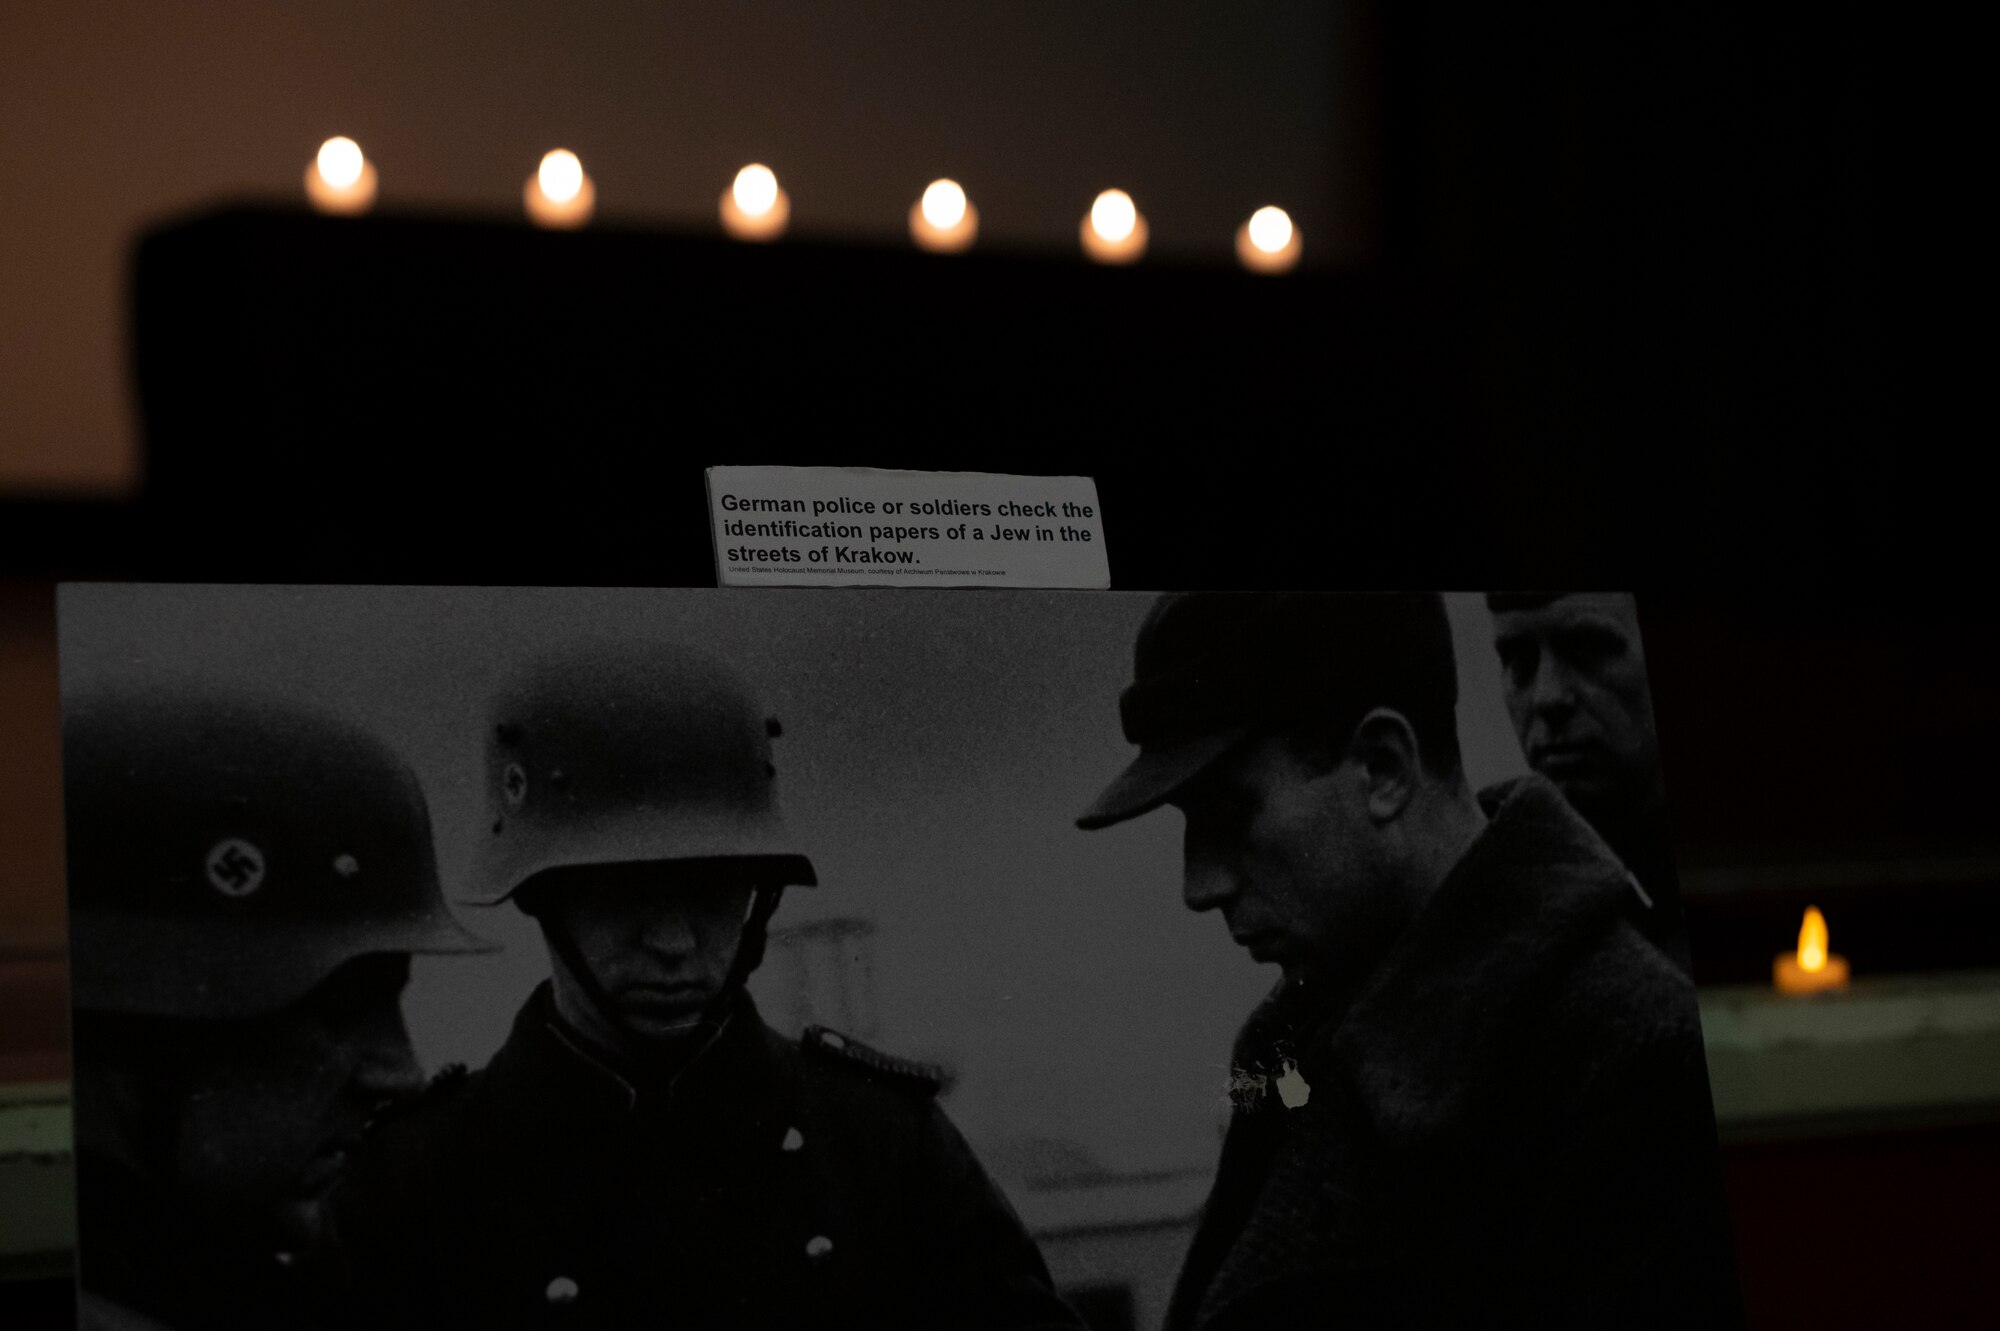 Photos and information pertaining to events during the holocaust are displayed around the stage during a Days of Remembrance candlelight ceremony at Kadena Air Base, Japan, April 25, 2022. The U.S. Congress established the Days of Remembrance as the nation’s annual commemoration of the Holocaust. (U.S. Air Force photo by Senior Airman Jessi Monte)